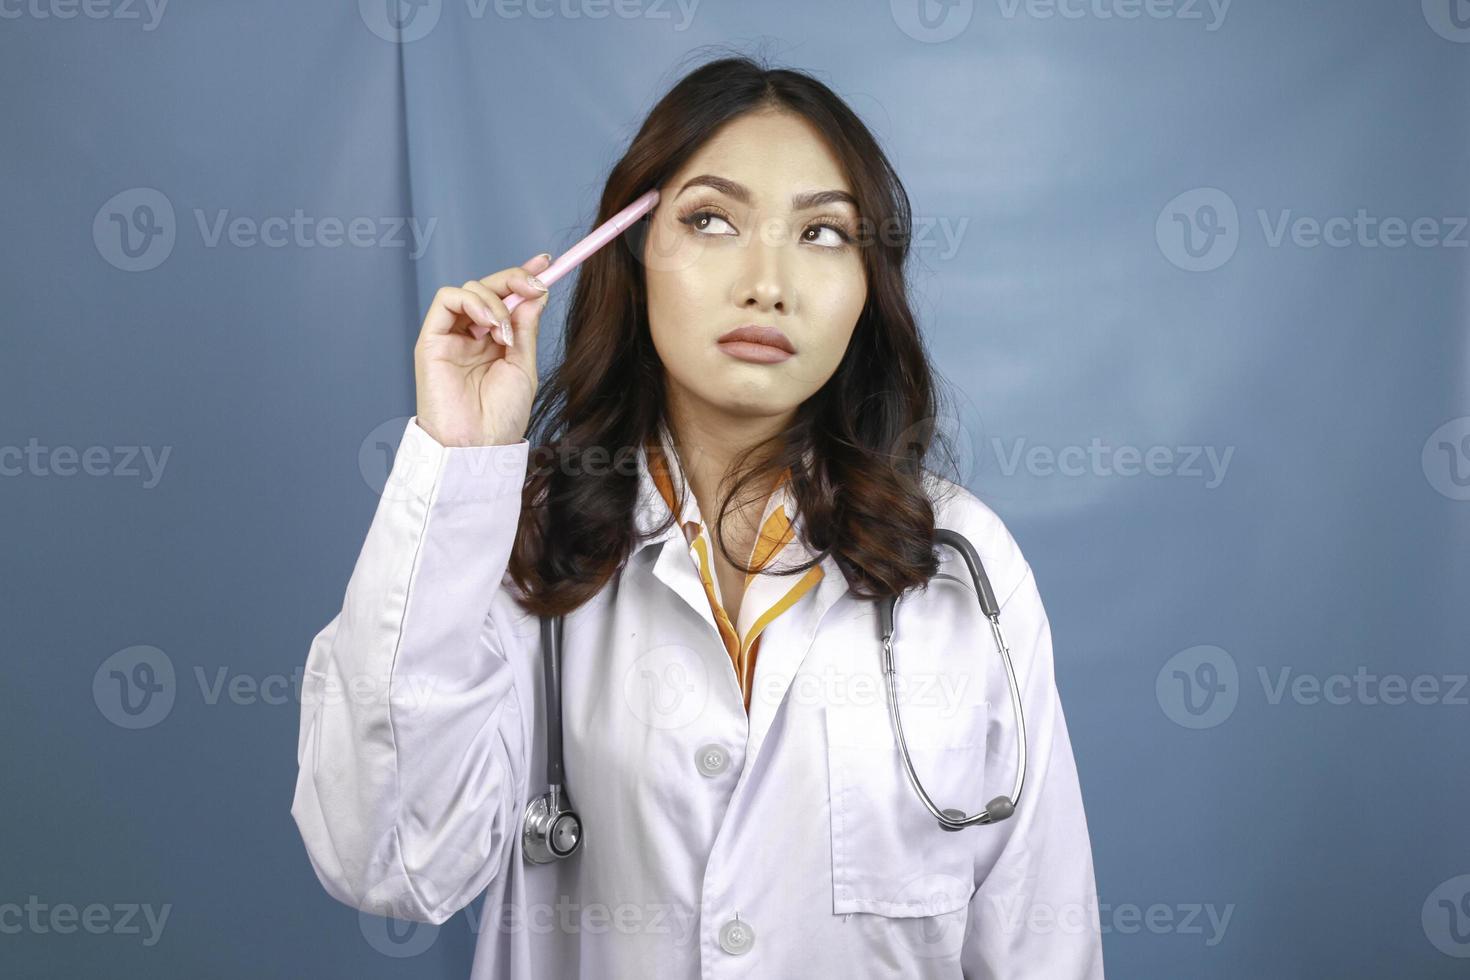 Young doctor woman over isolated background thinking an idea photo